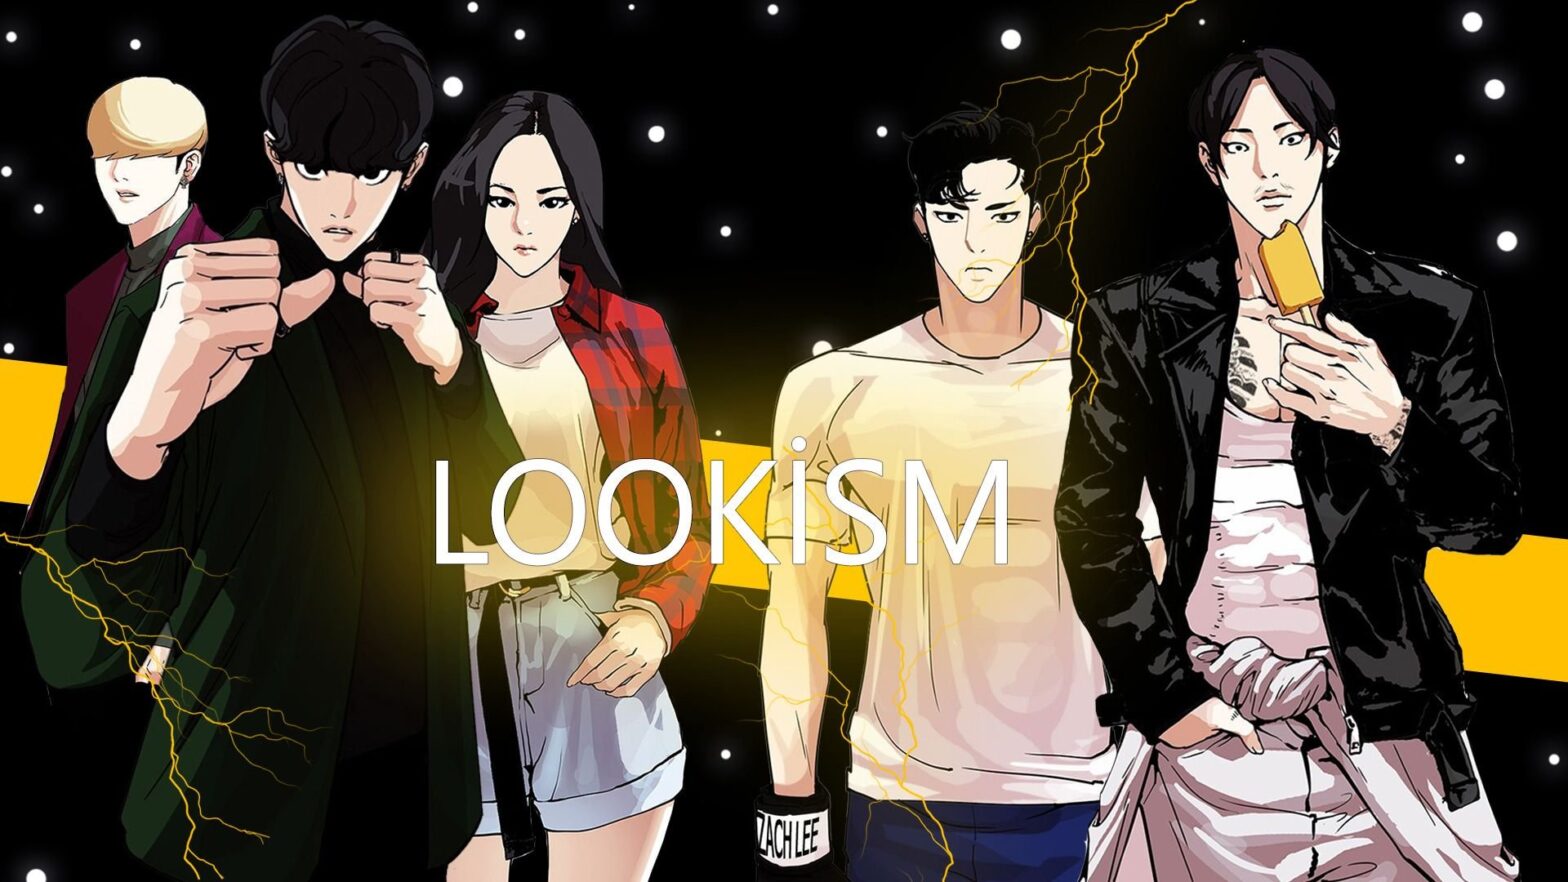 Lookism chapter next release date